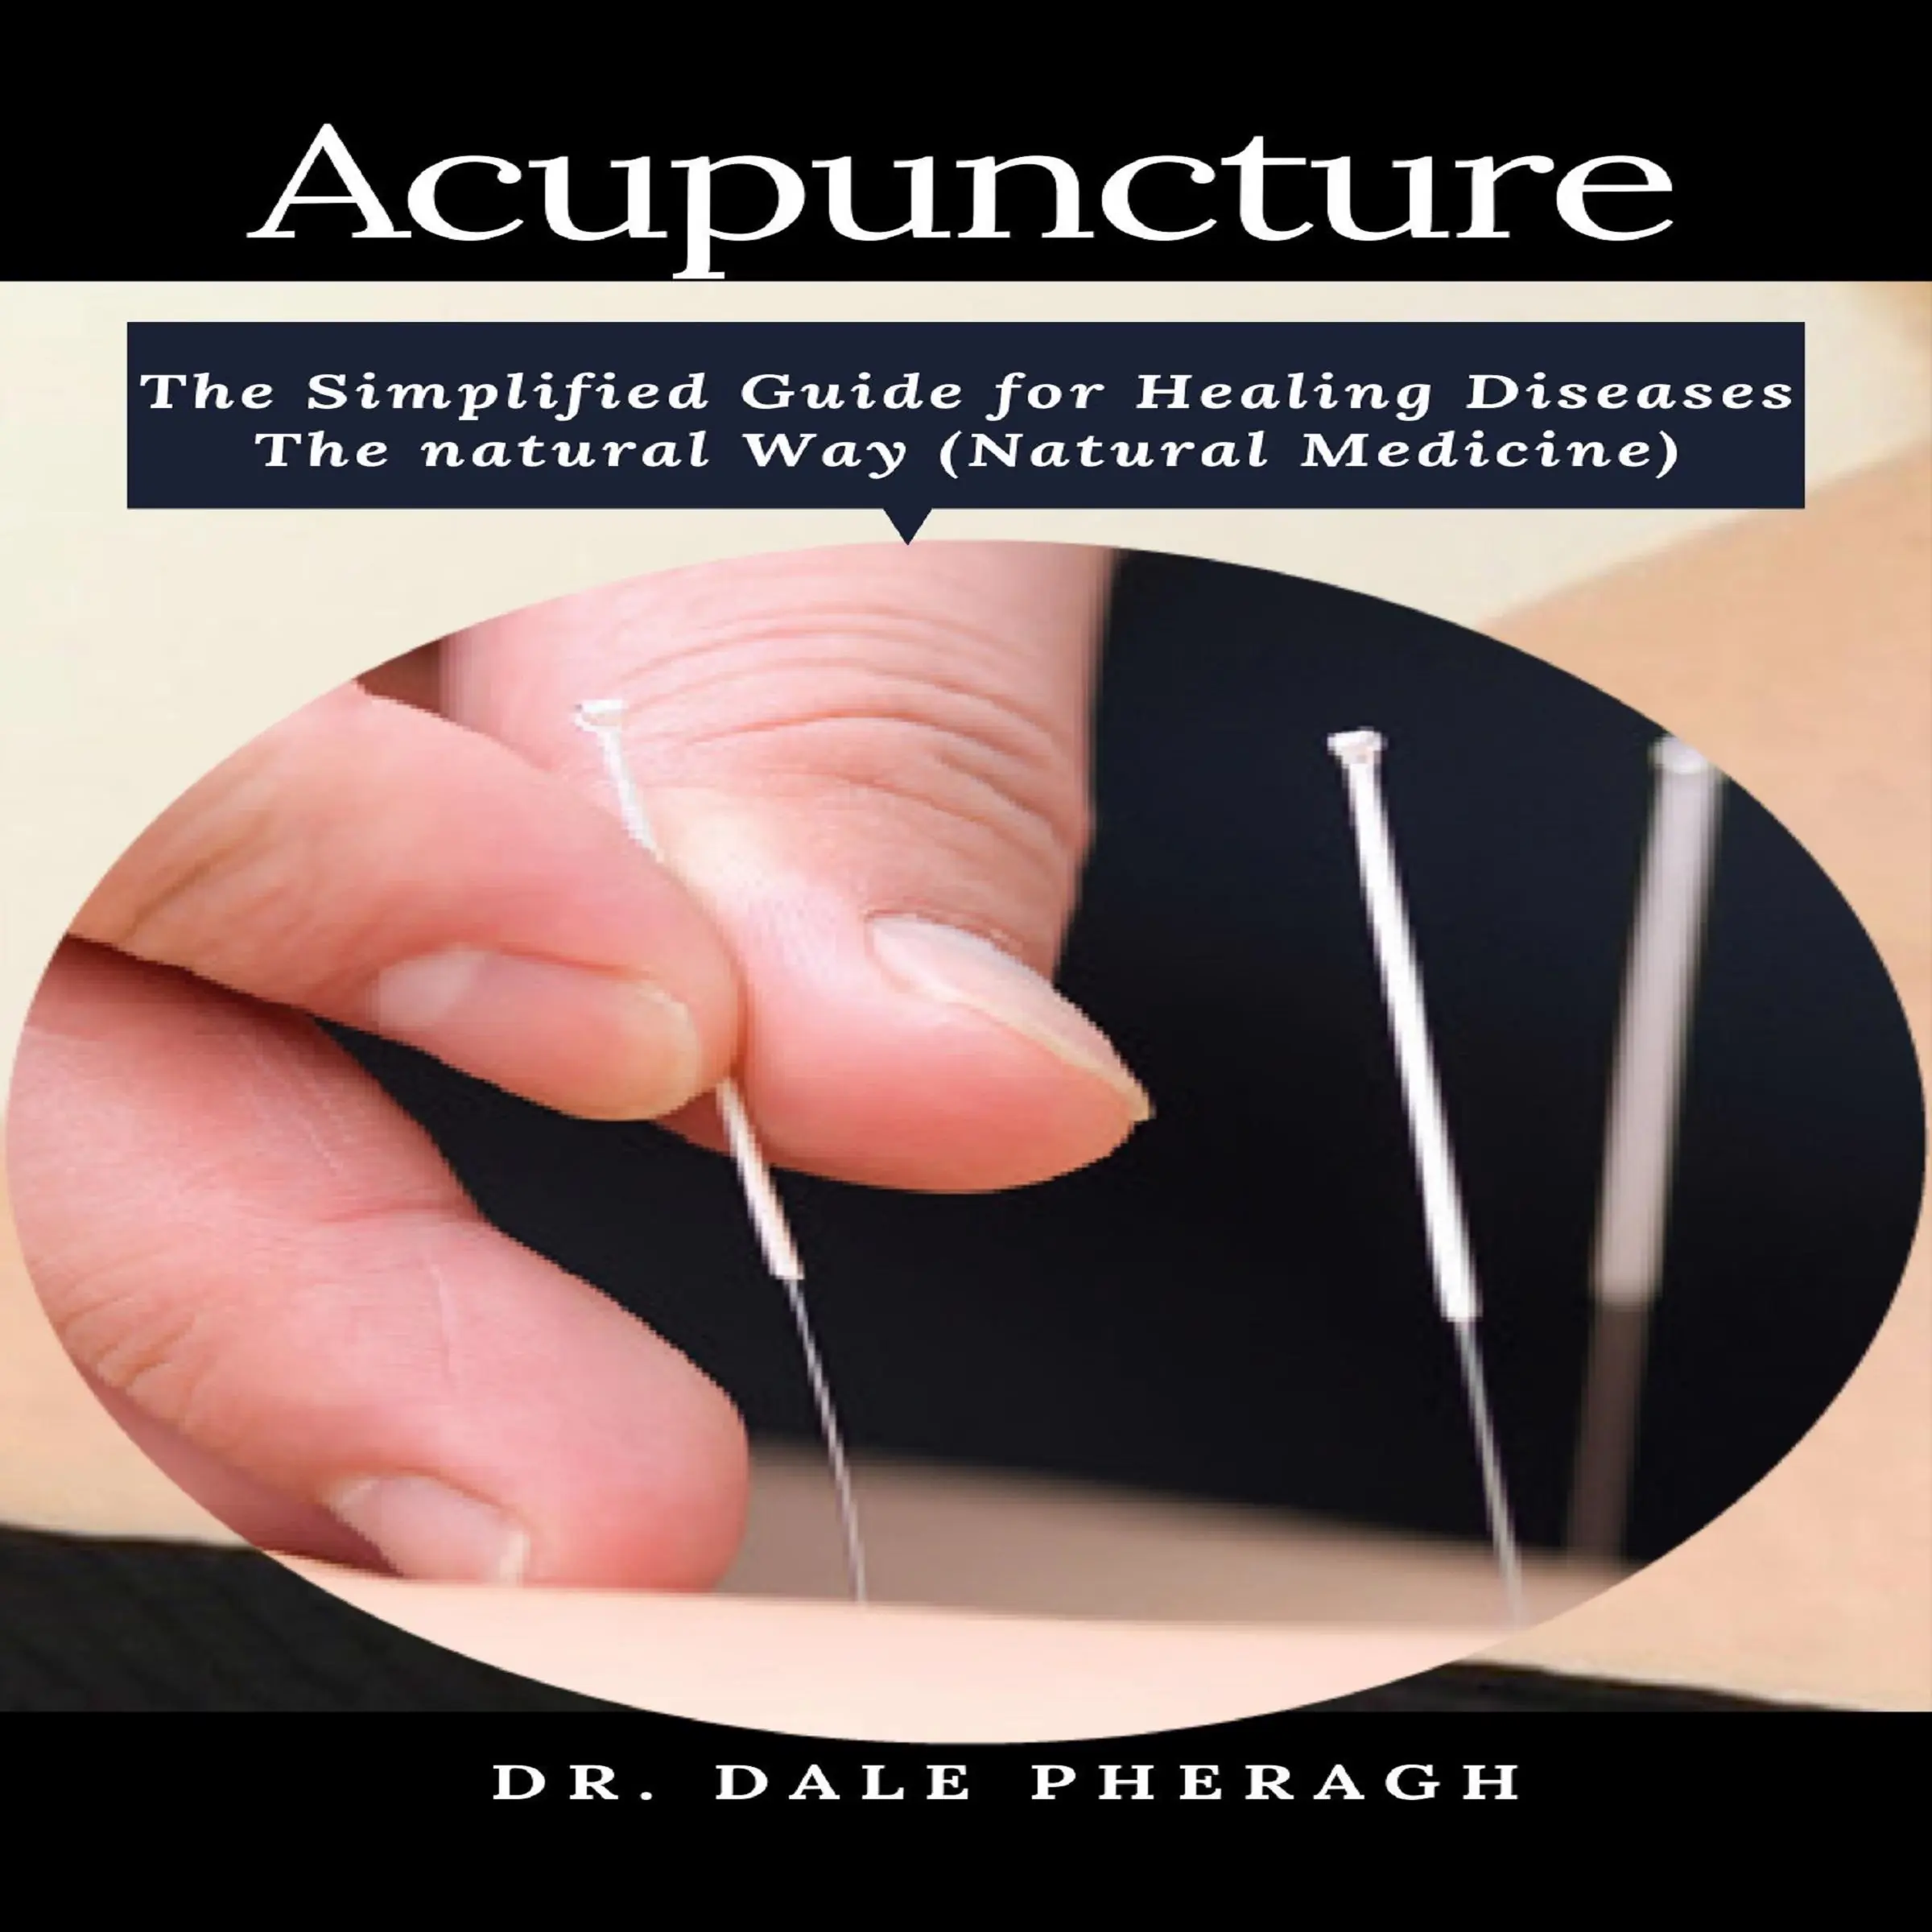 Acupuncture: The Simplified Guide for Healing Diseases The natural Way (Natural Medicine) Audiobook by Dr. Dale Pheragh